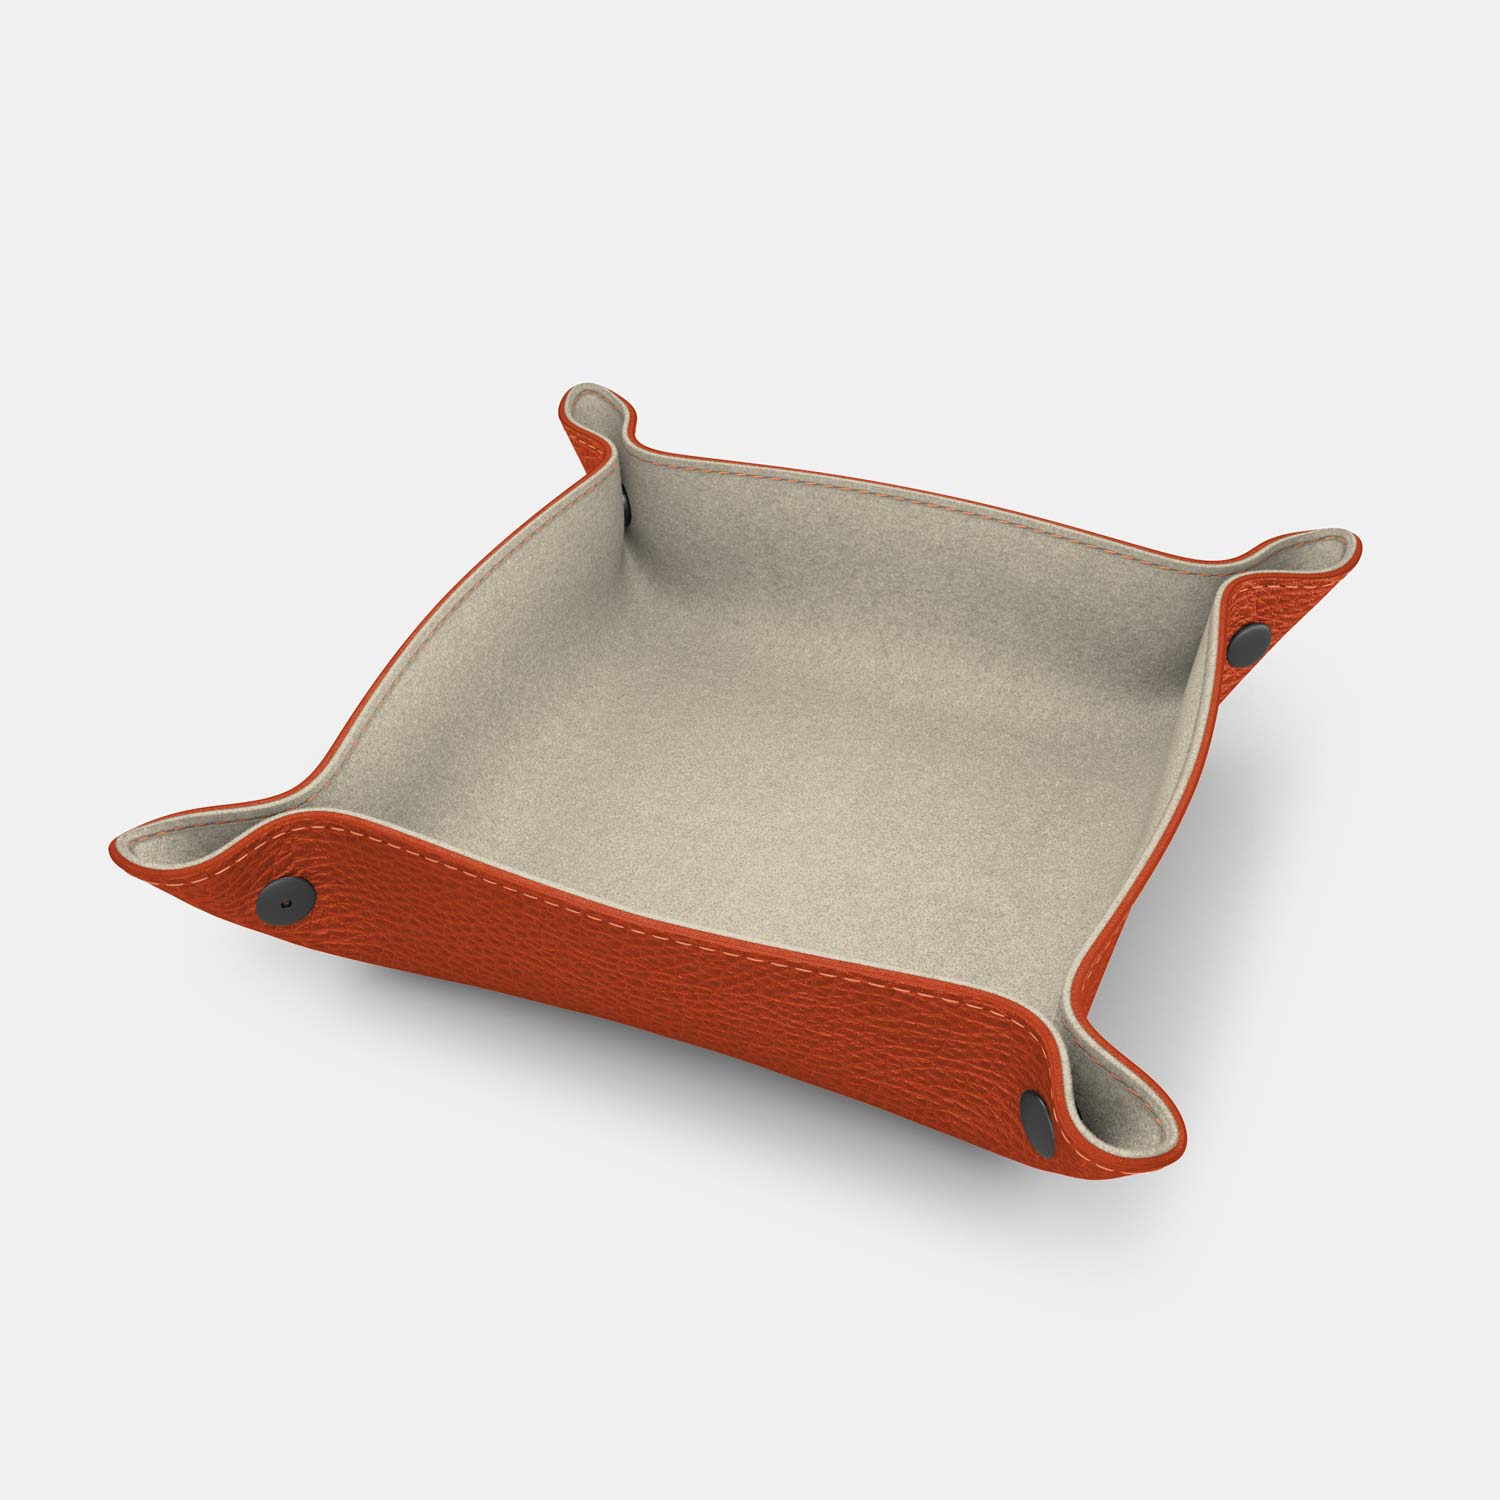 Leather Catch-all Tray - Orange and Beige - RYAN London